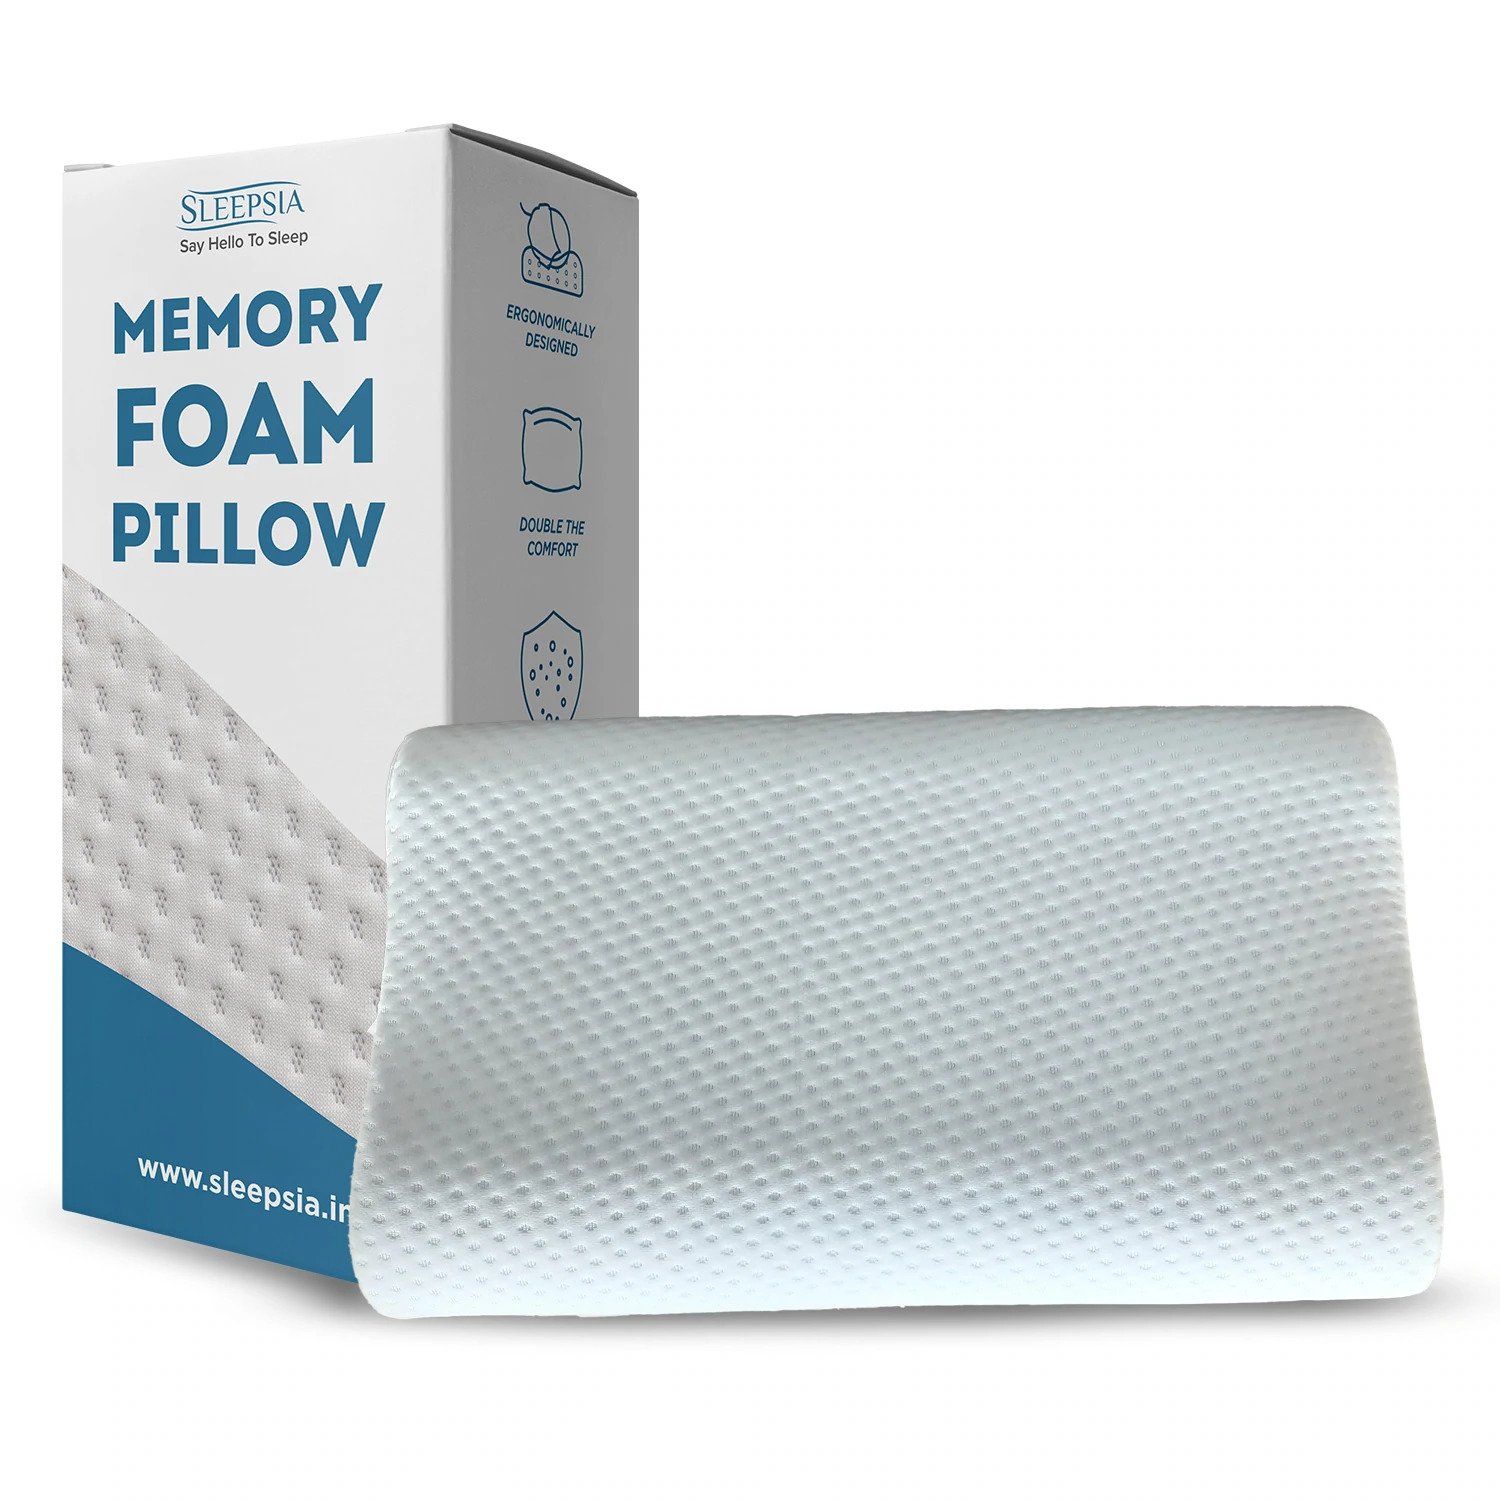 Are Contour Pillows Good for Back Sleepers?